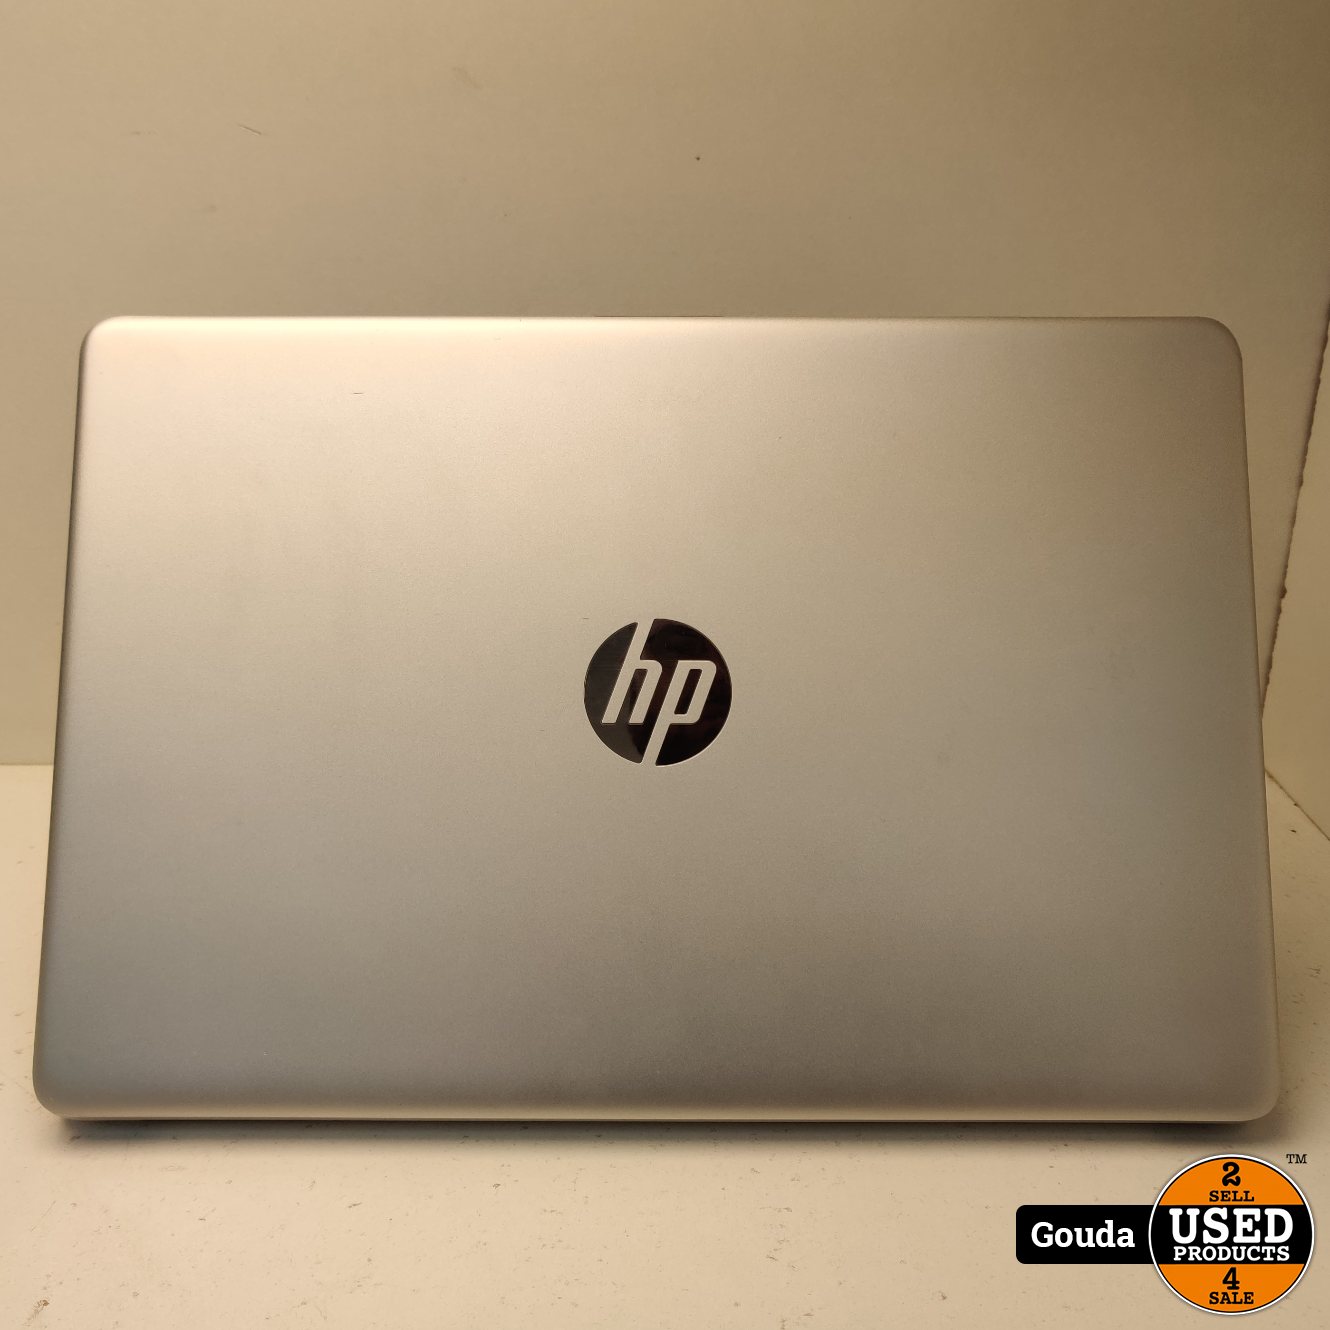 HP 15s-eq1721nd laptop - Used